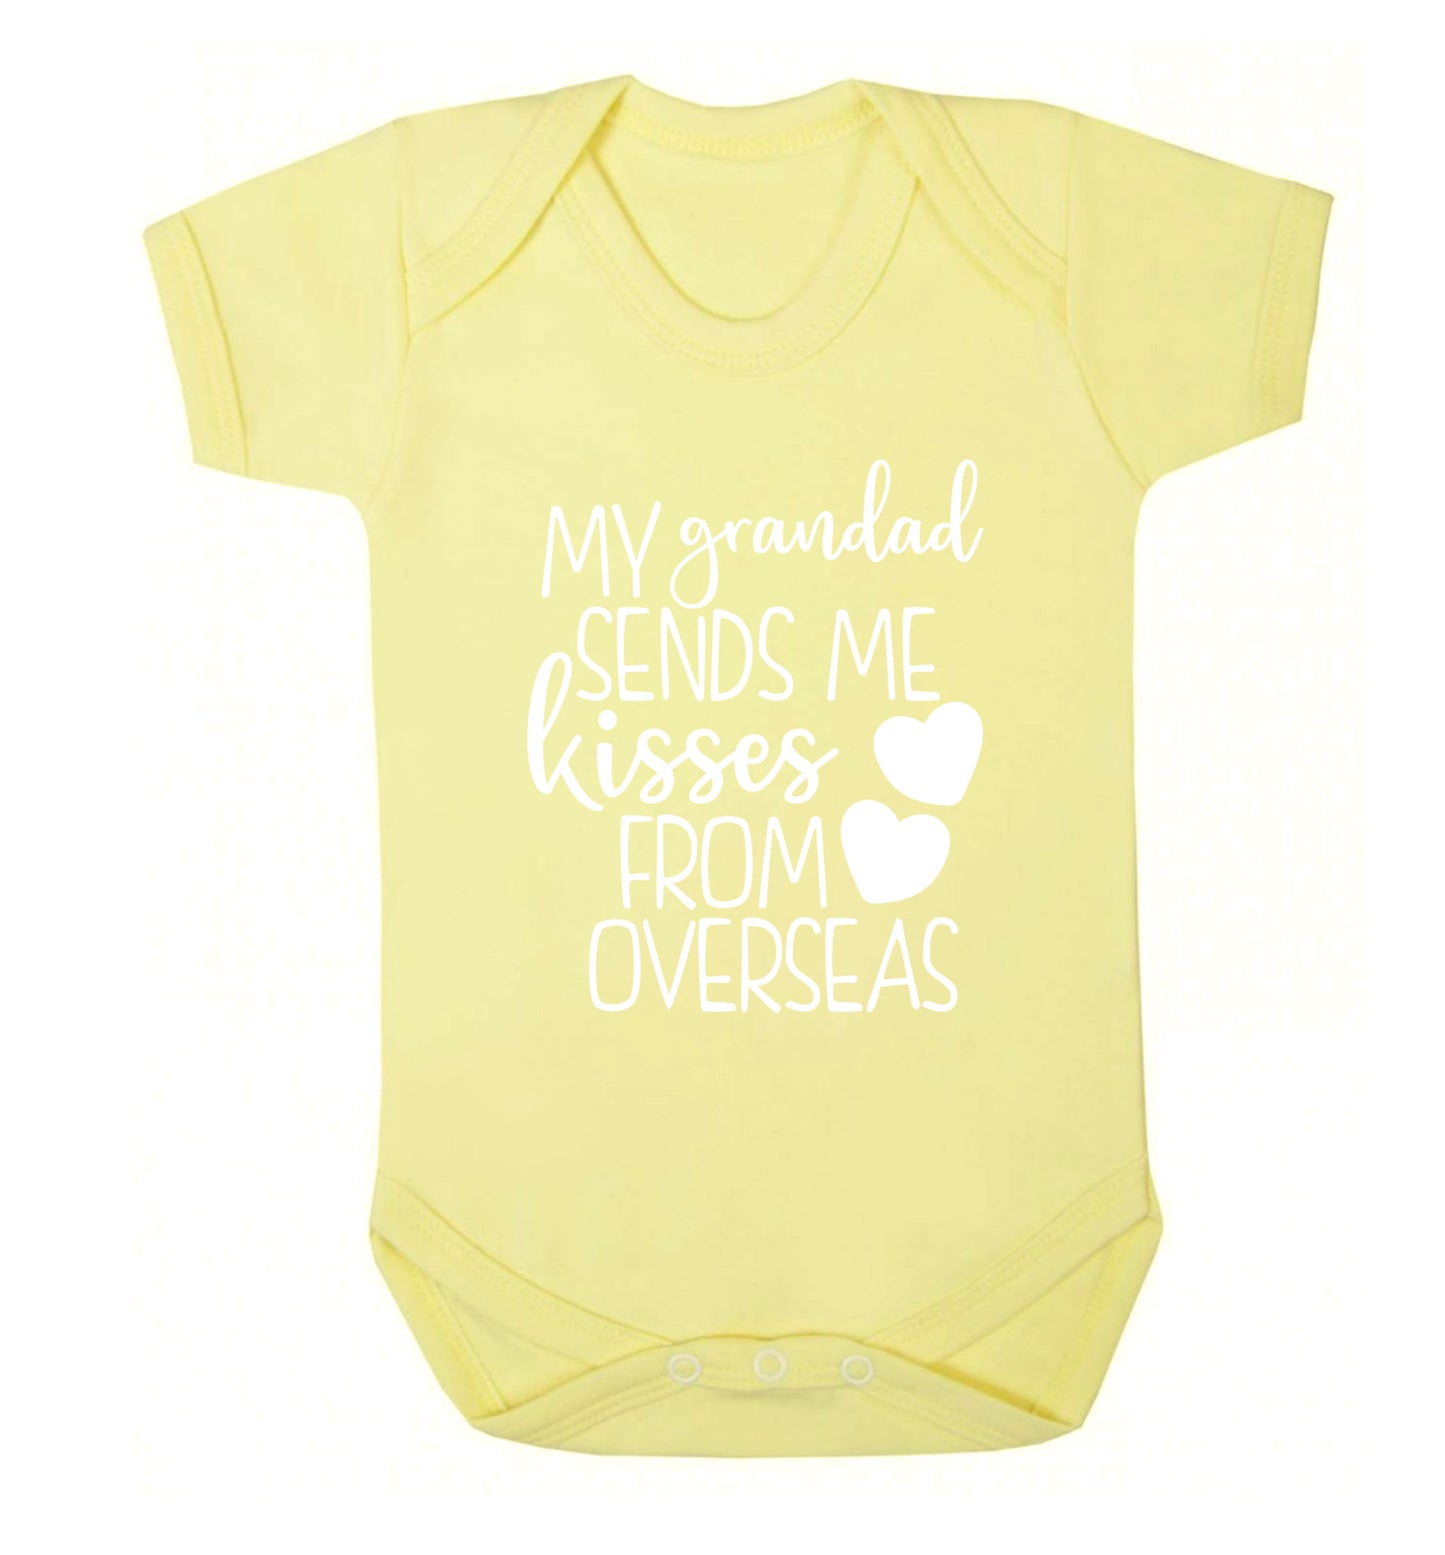 My Grandad sends me kisses from overseas Baby Vest pale yellow 18-24 months